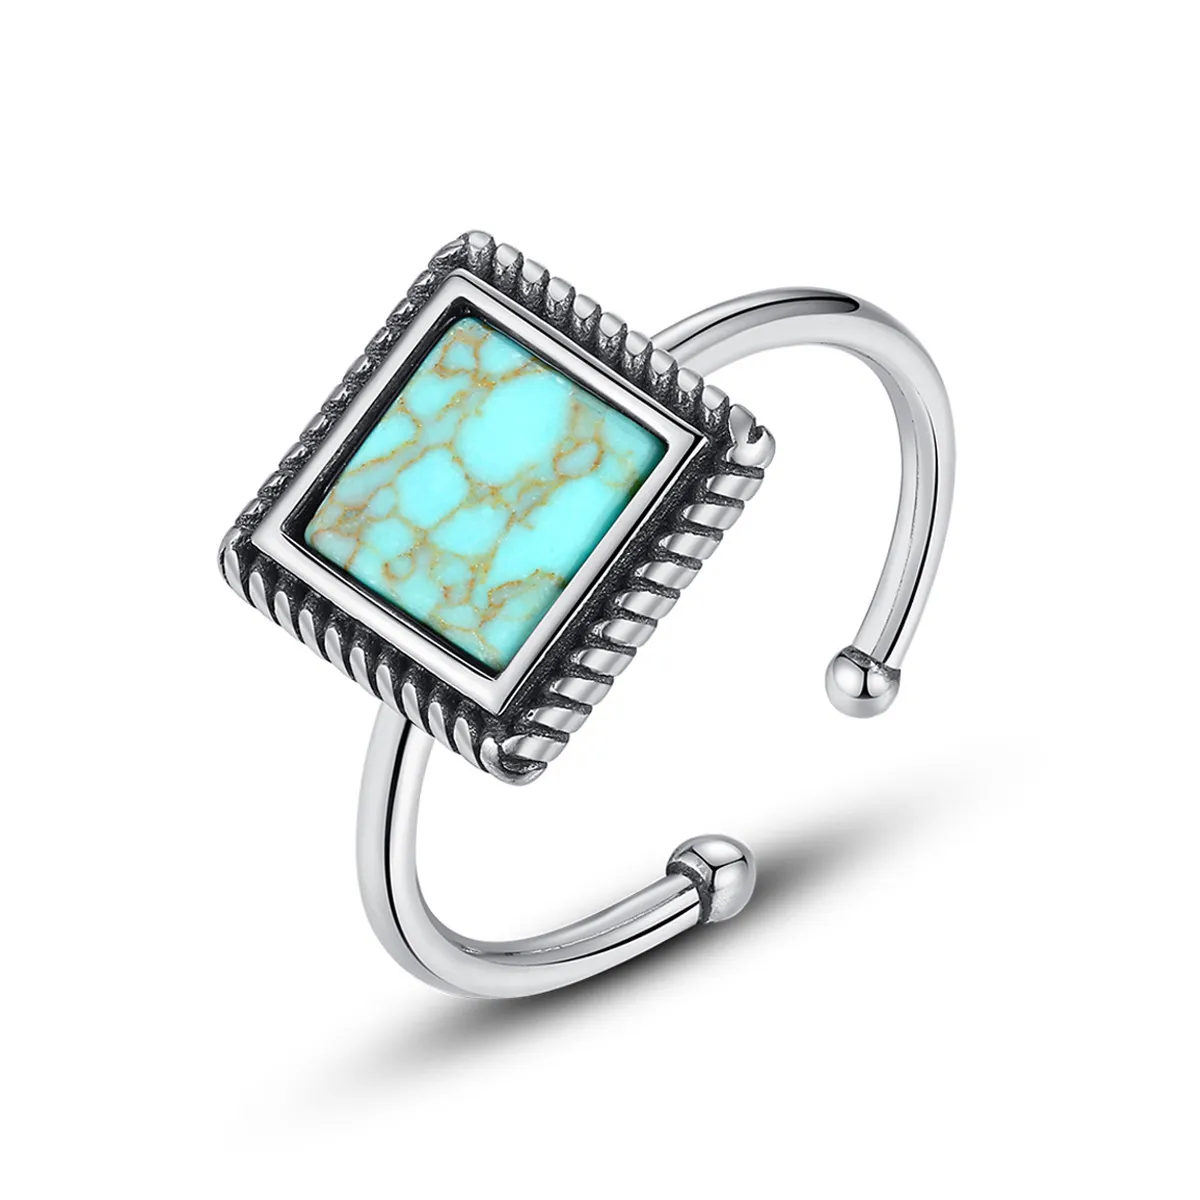 European retro turquoise open ring women fashion luxury brand s925 silver square ring charm female wedding party high-end jewelry Valentine's Day gift